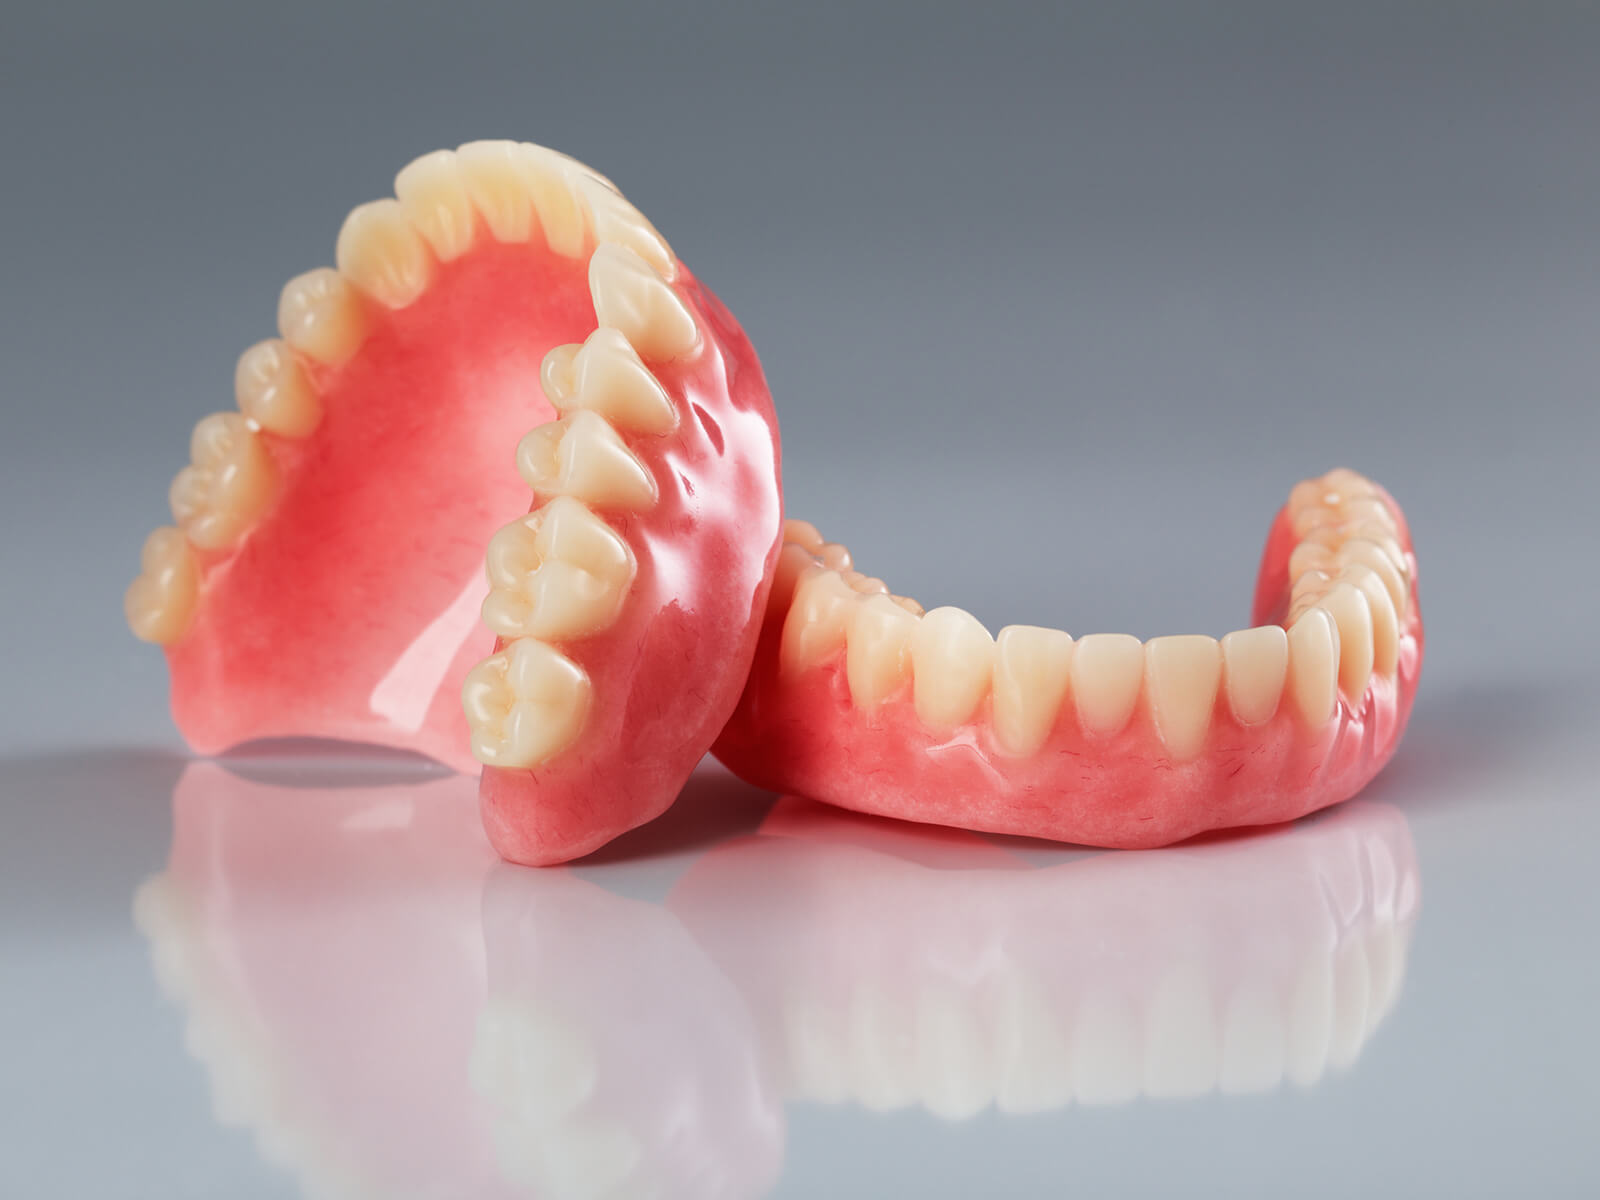 How To Use Denture Adhesive Effectively?